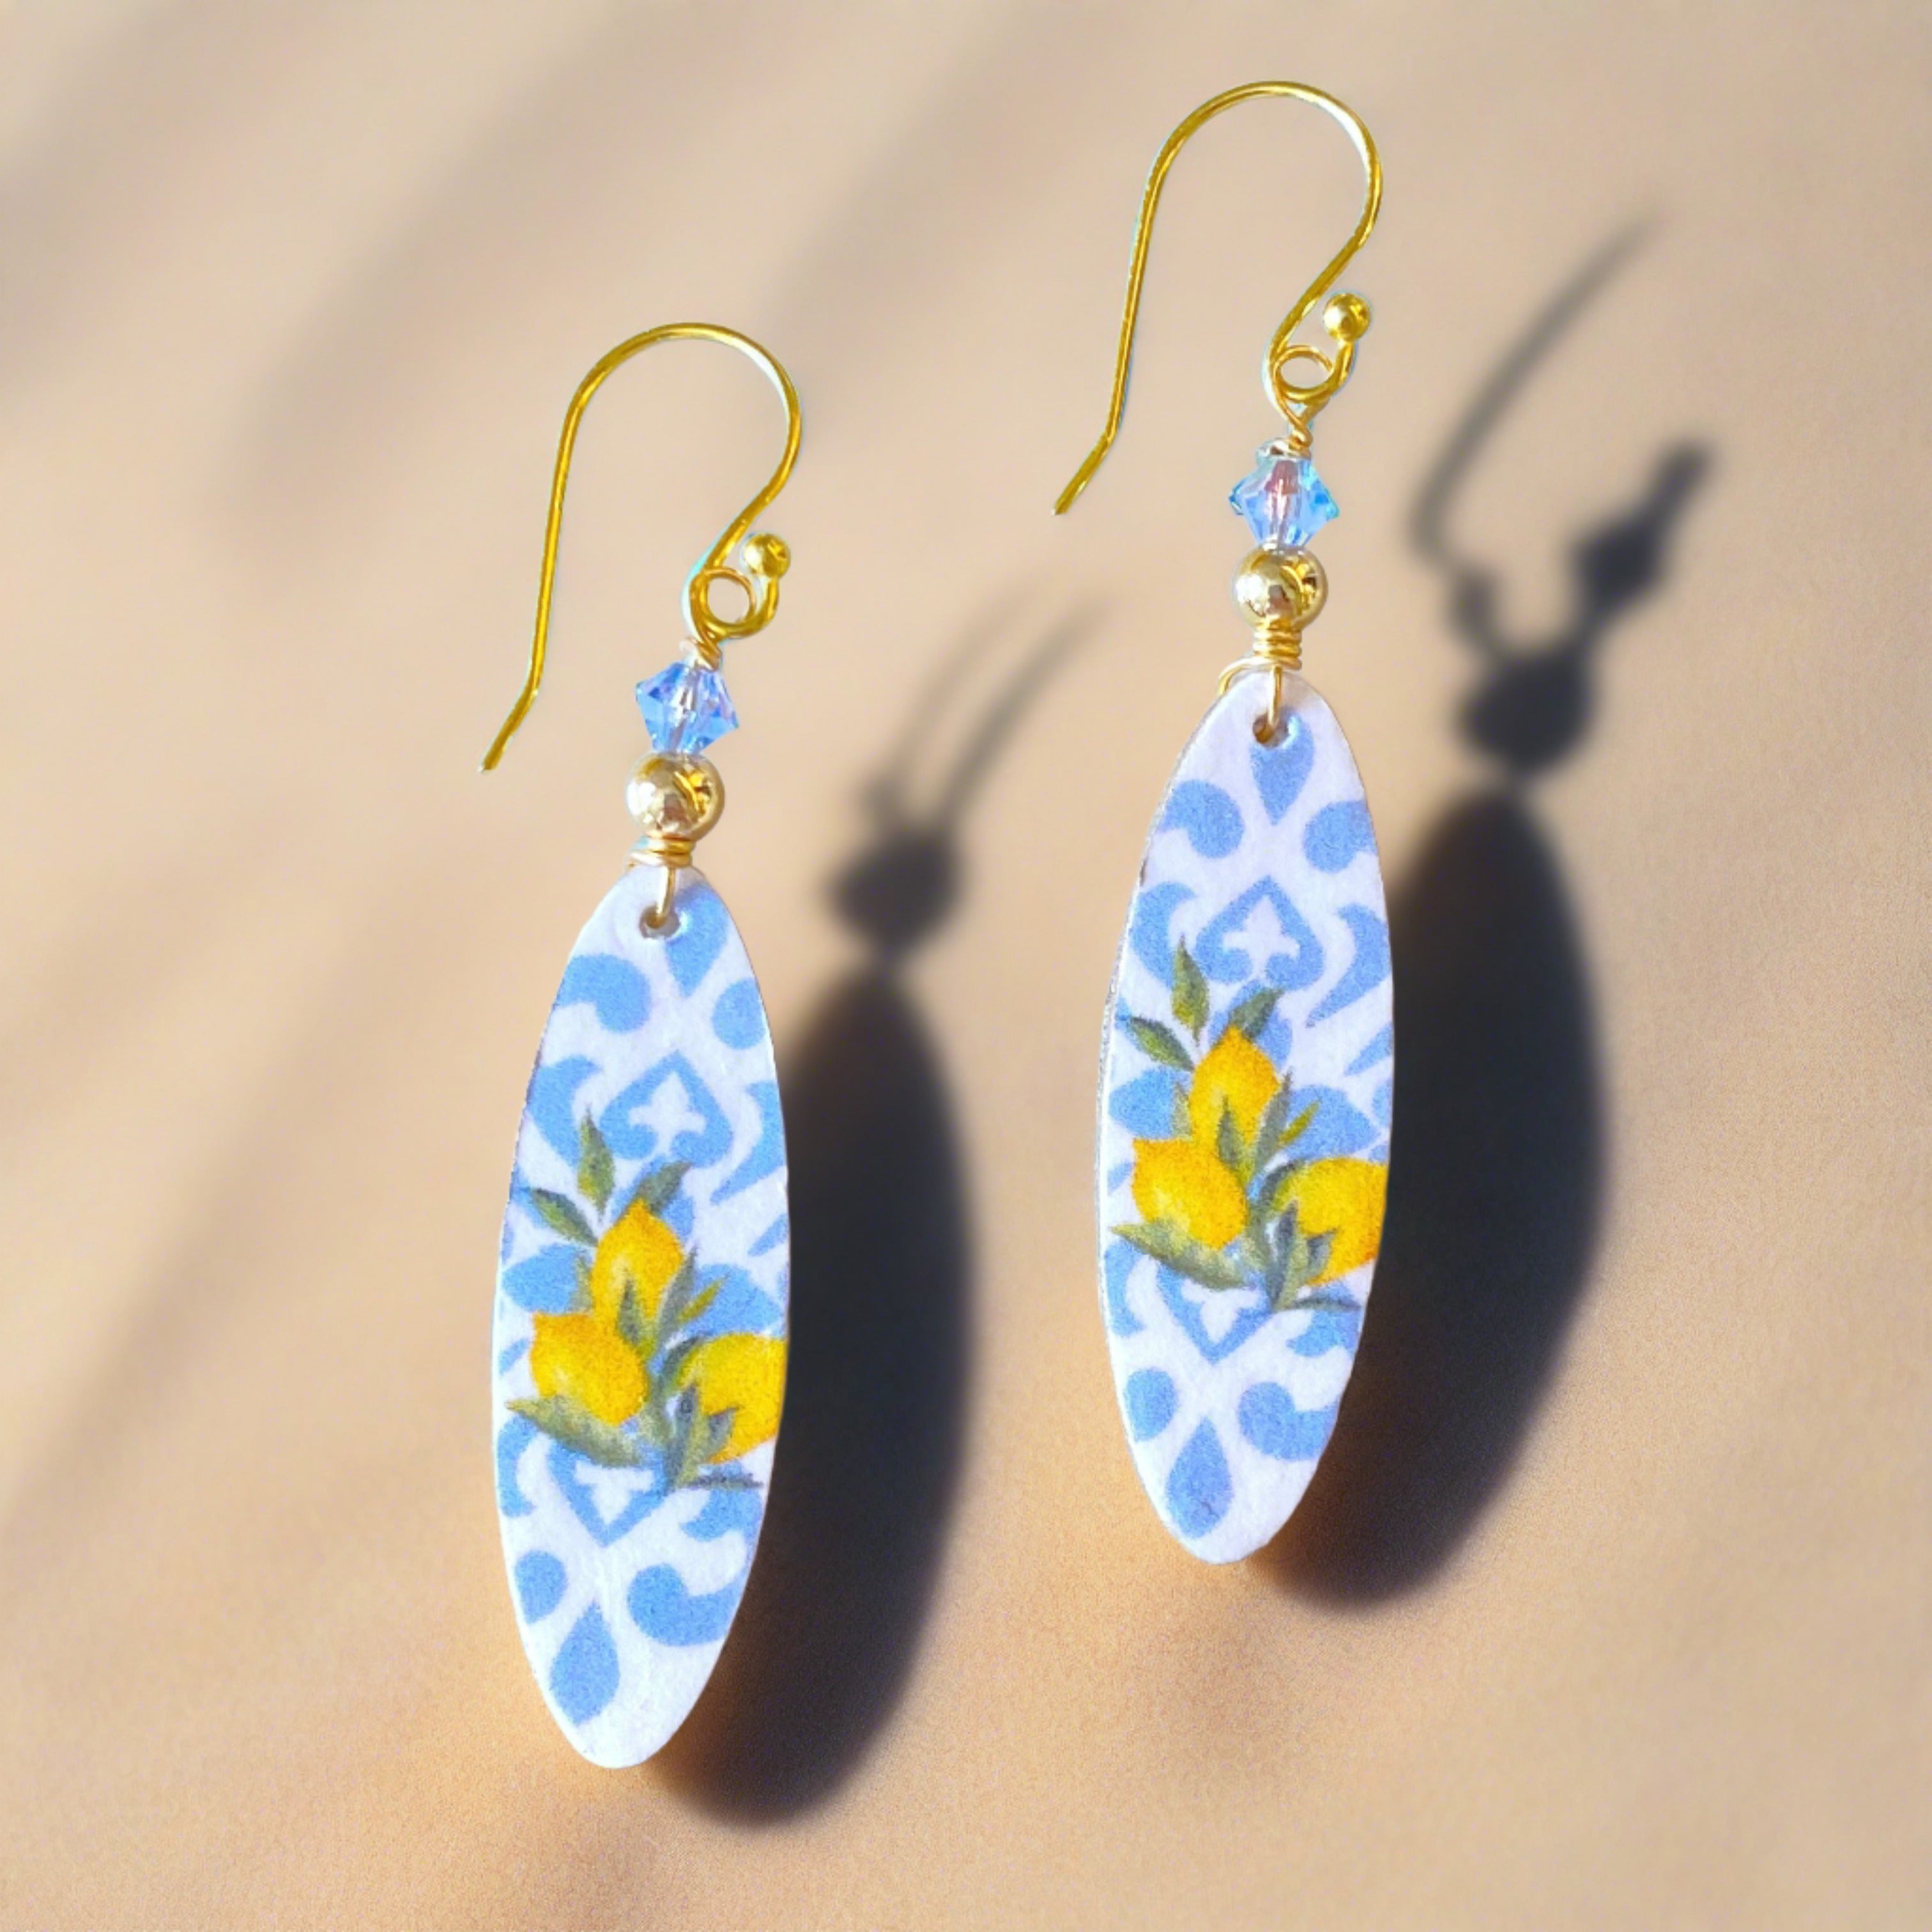 surboard shaped earrings that have an italian tile print and lemons on the front, adorned with a blue crystsal at the top and on fishhook style ear hooks